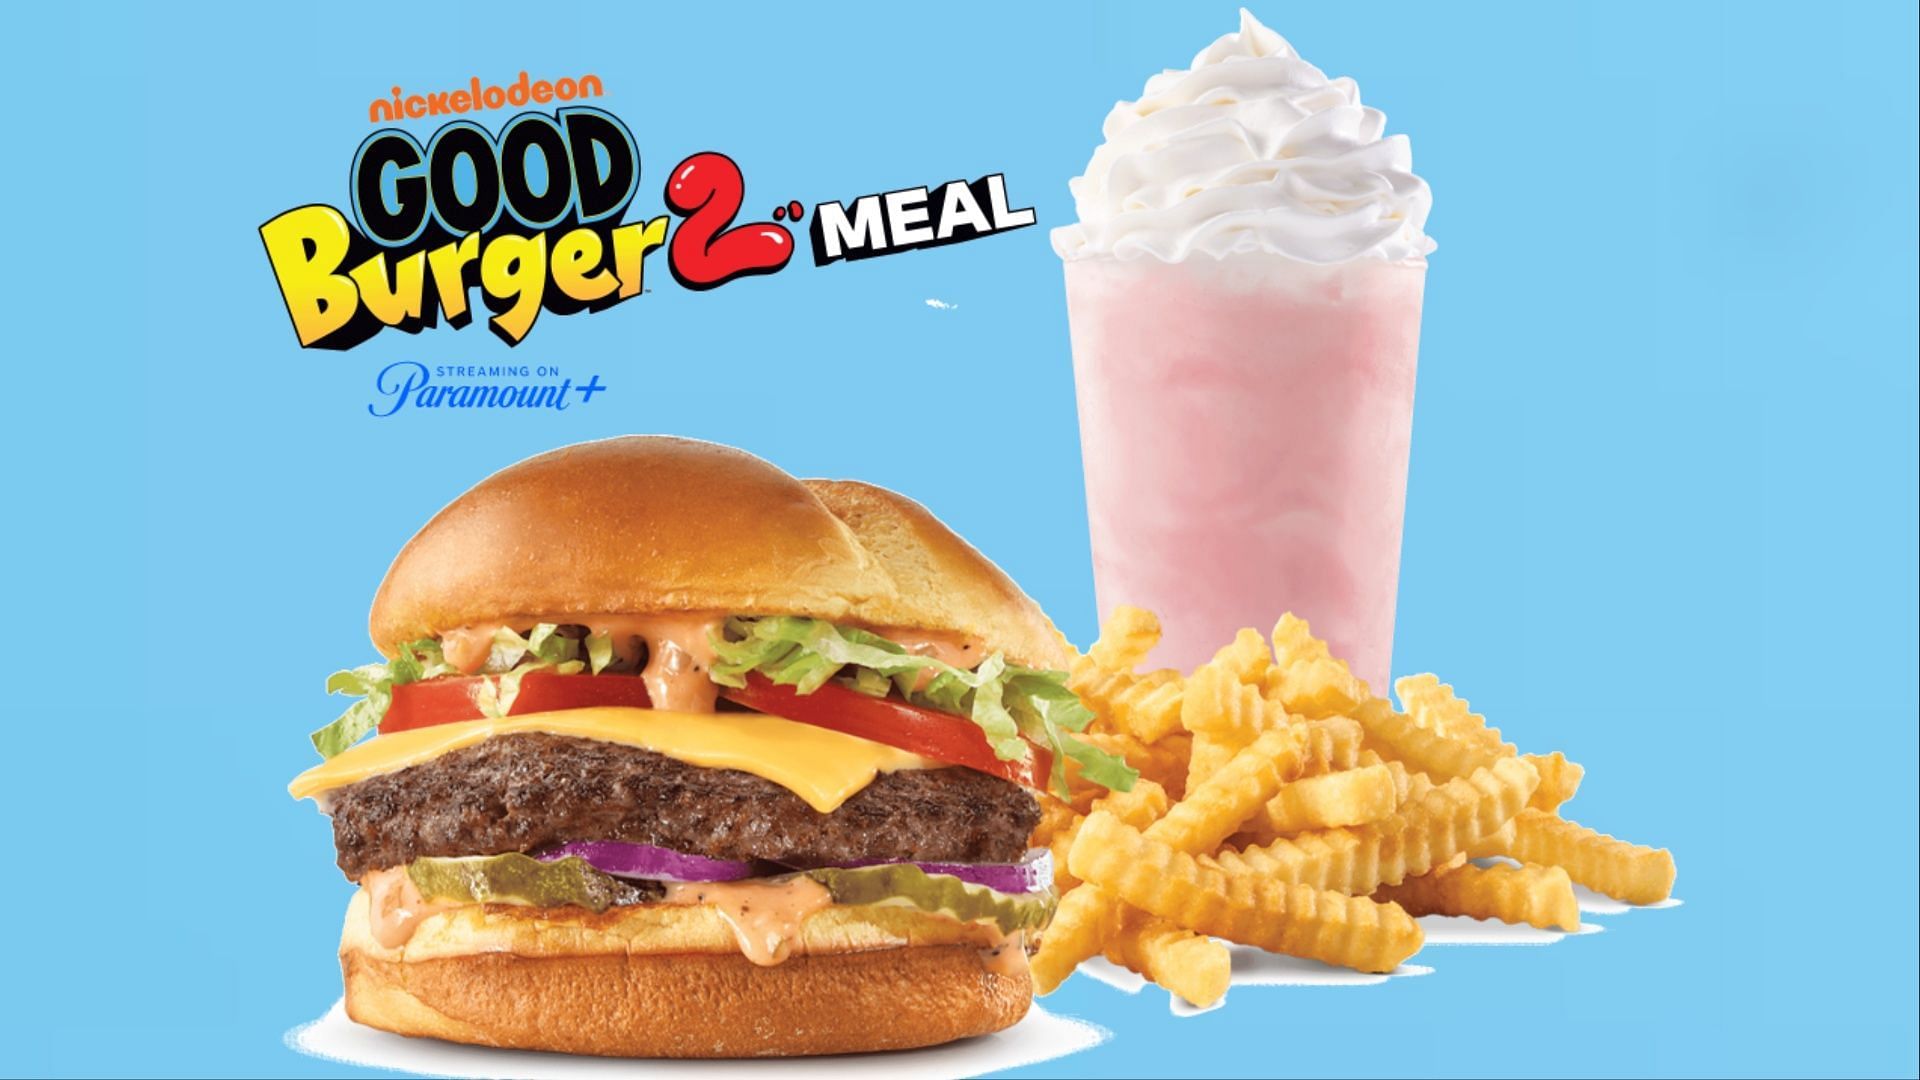 The Good Burger 2 meal hits stores nationwide on November 13 (Image via Arby&rsquo;s)